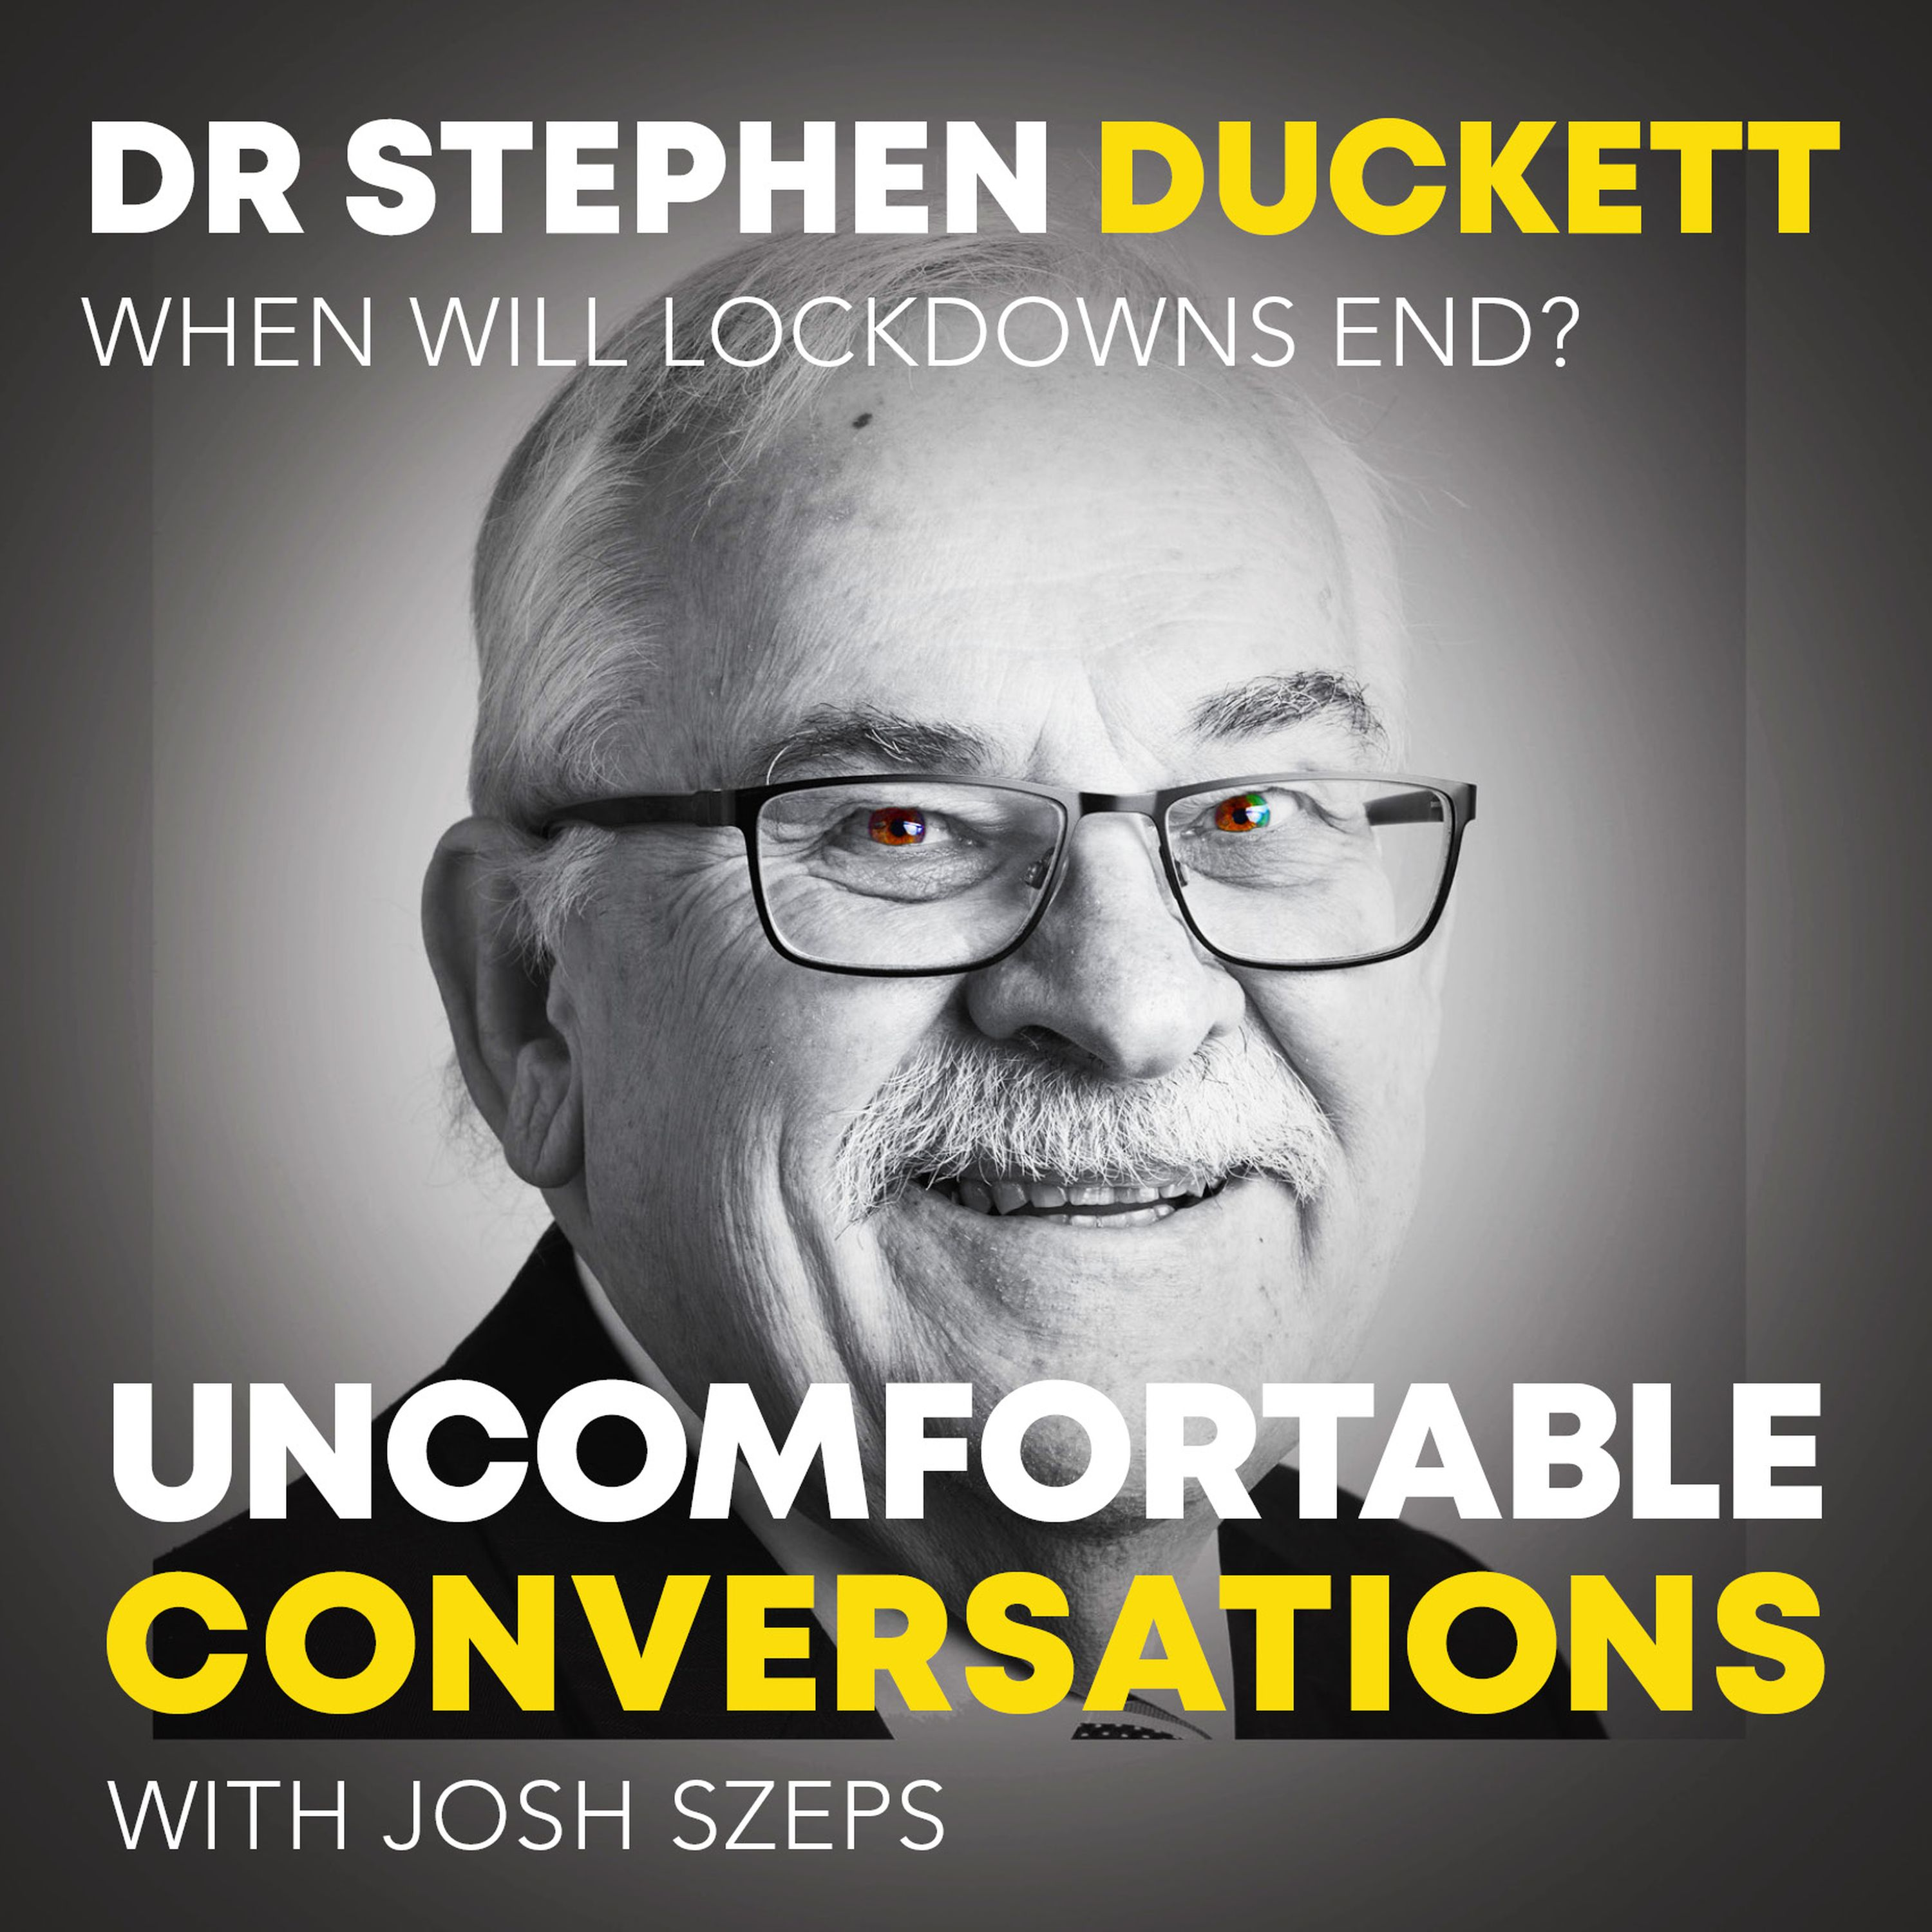 "When Will Lockdowns End?" with Dr Stephen Duckett